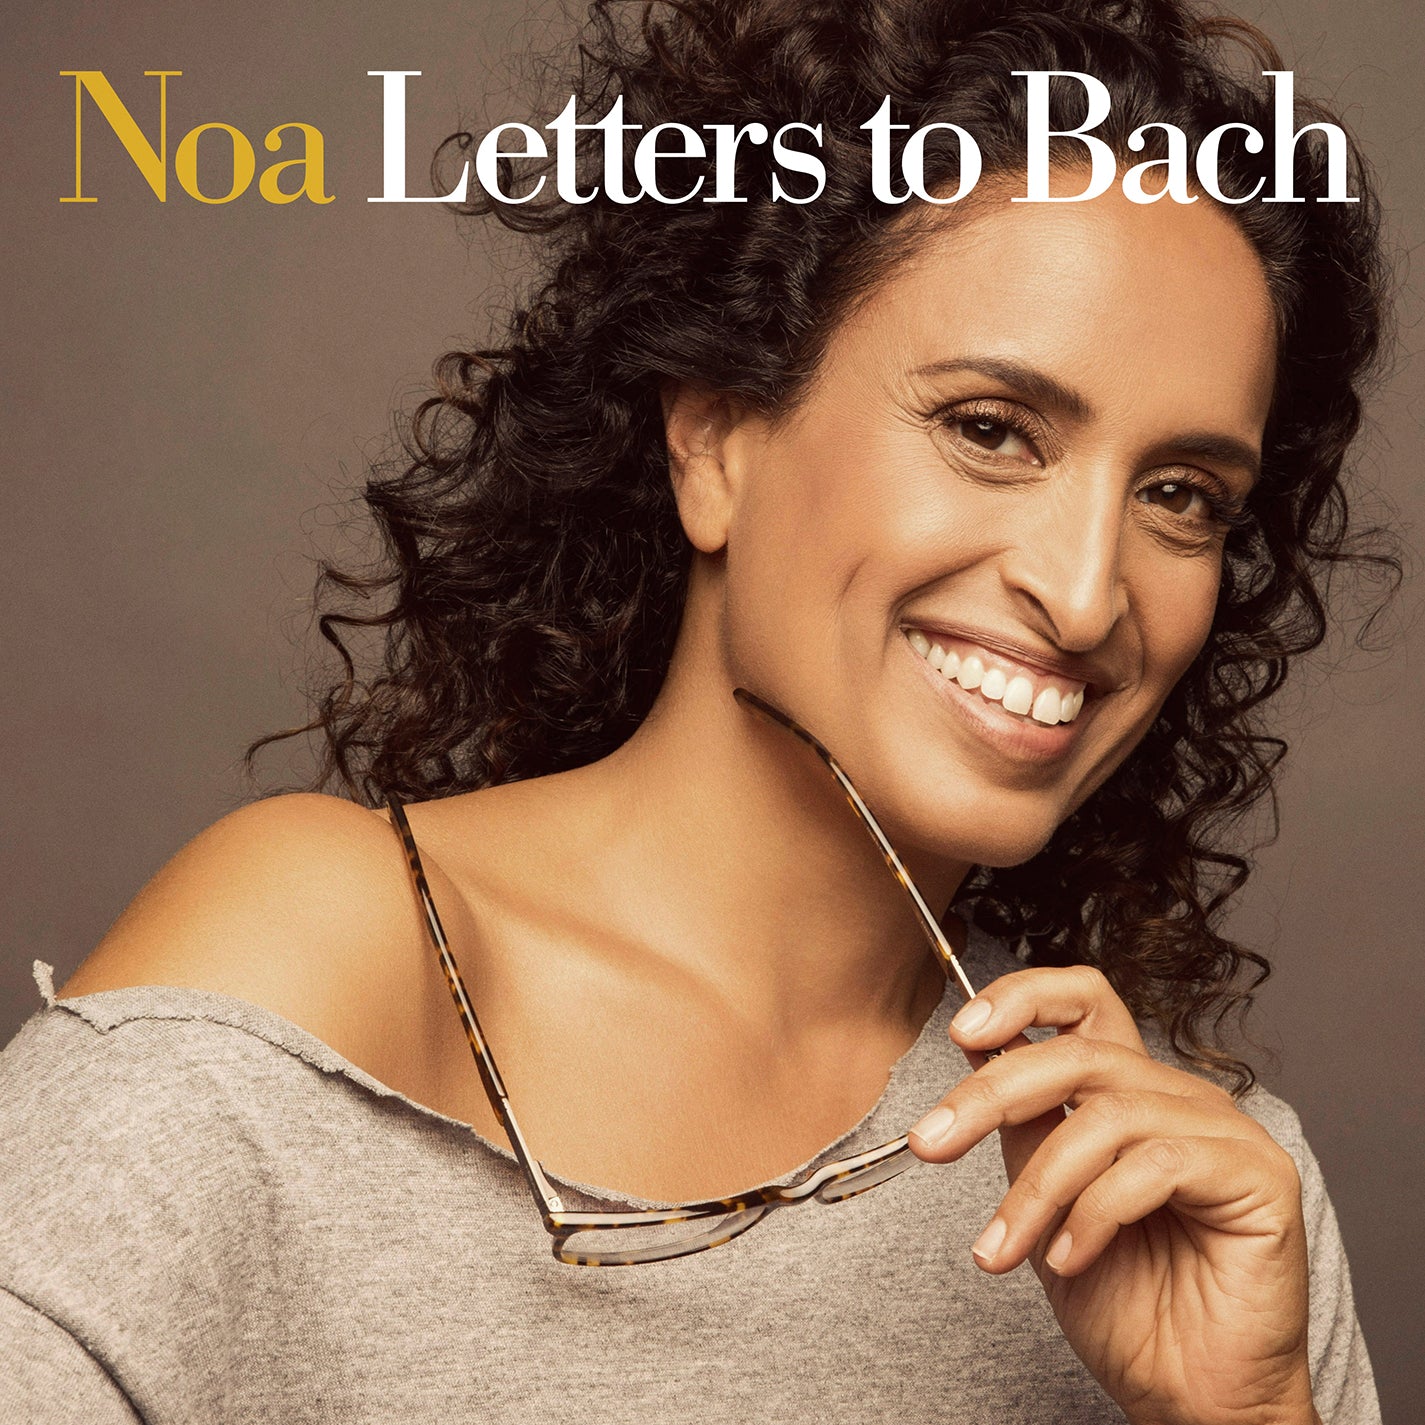 Noa: Letters to Bach